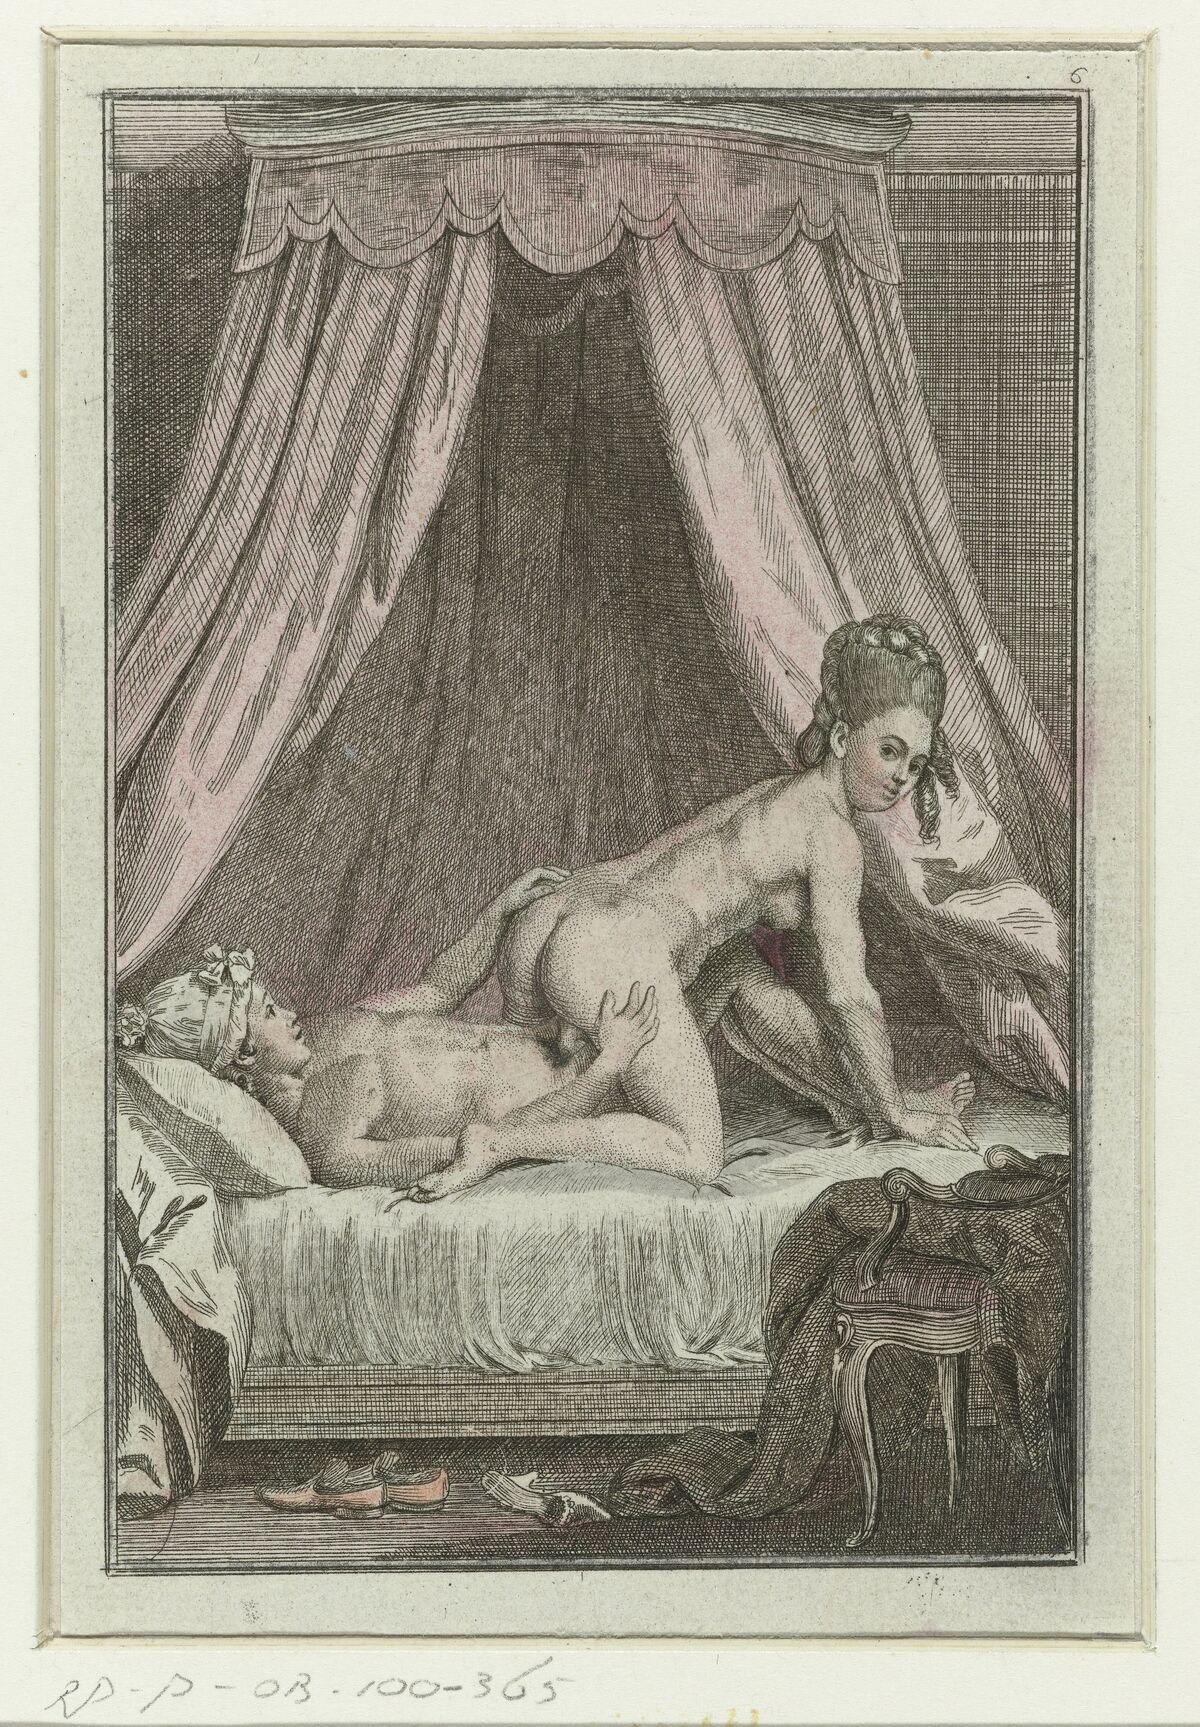 Anonymous, Erotic Series with Couples in Bed, ca. 1750–1800. Courtesy of the Rijksmuseum.